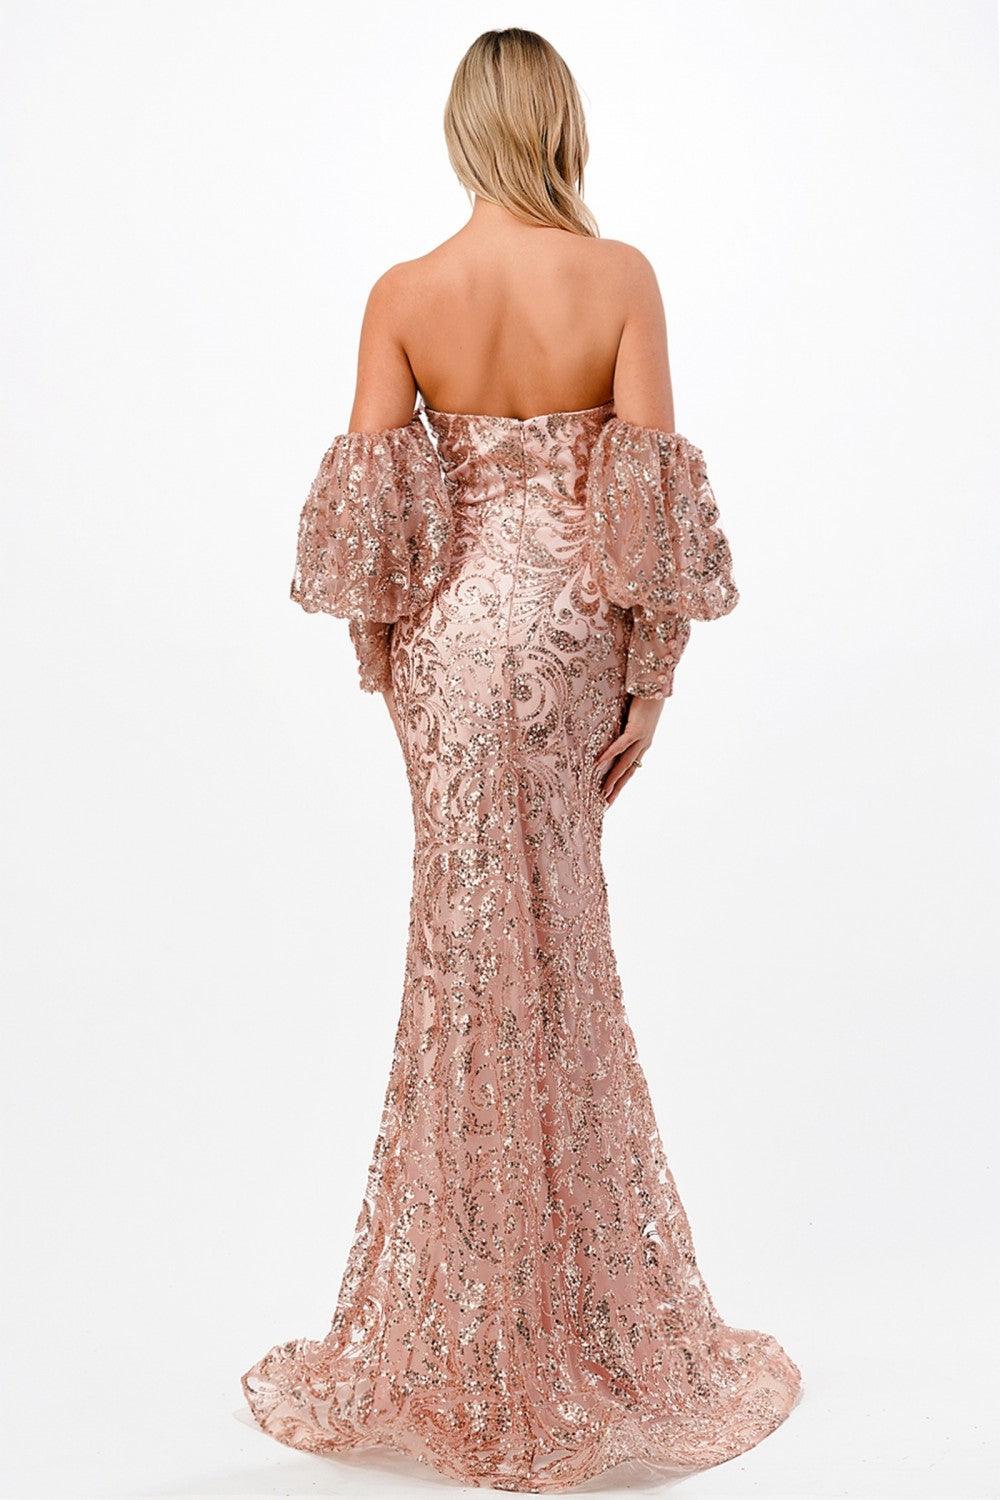 Strapless Long Embellished Sexy Prom Dress - The Dress Outlet